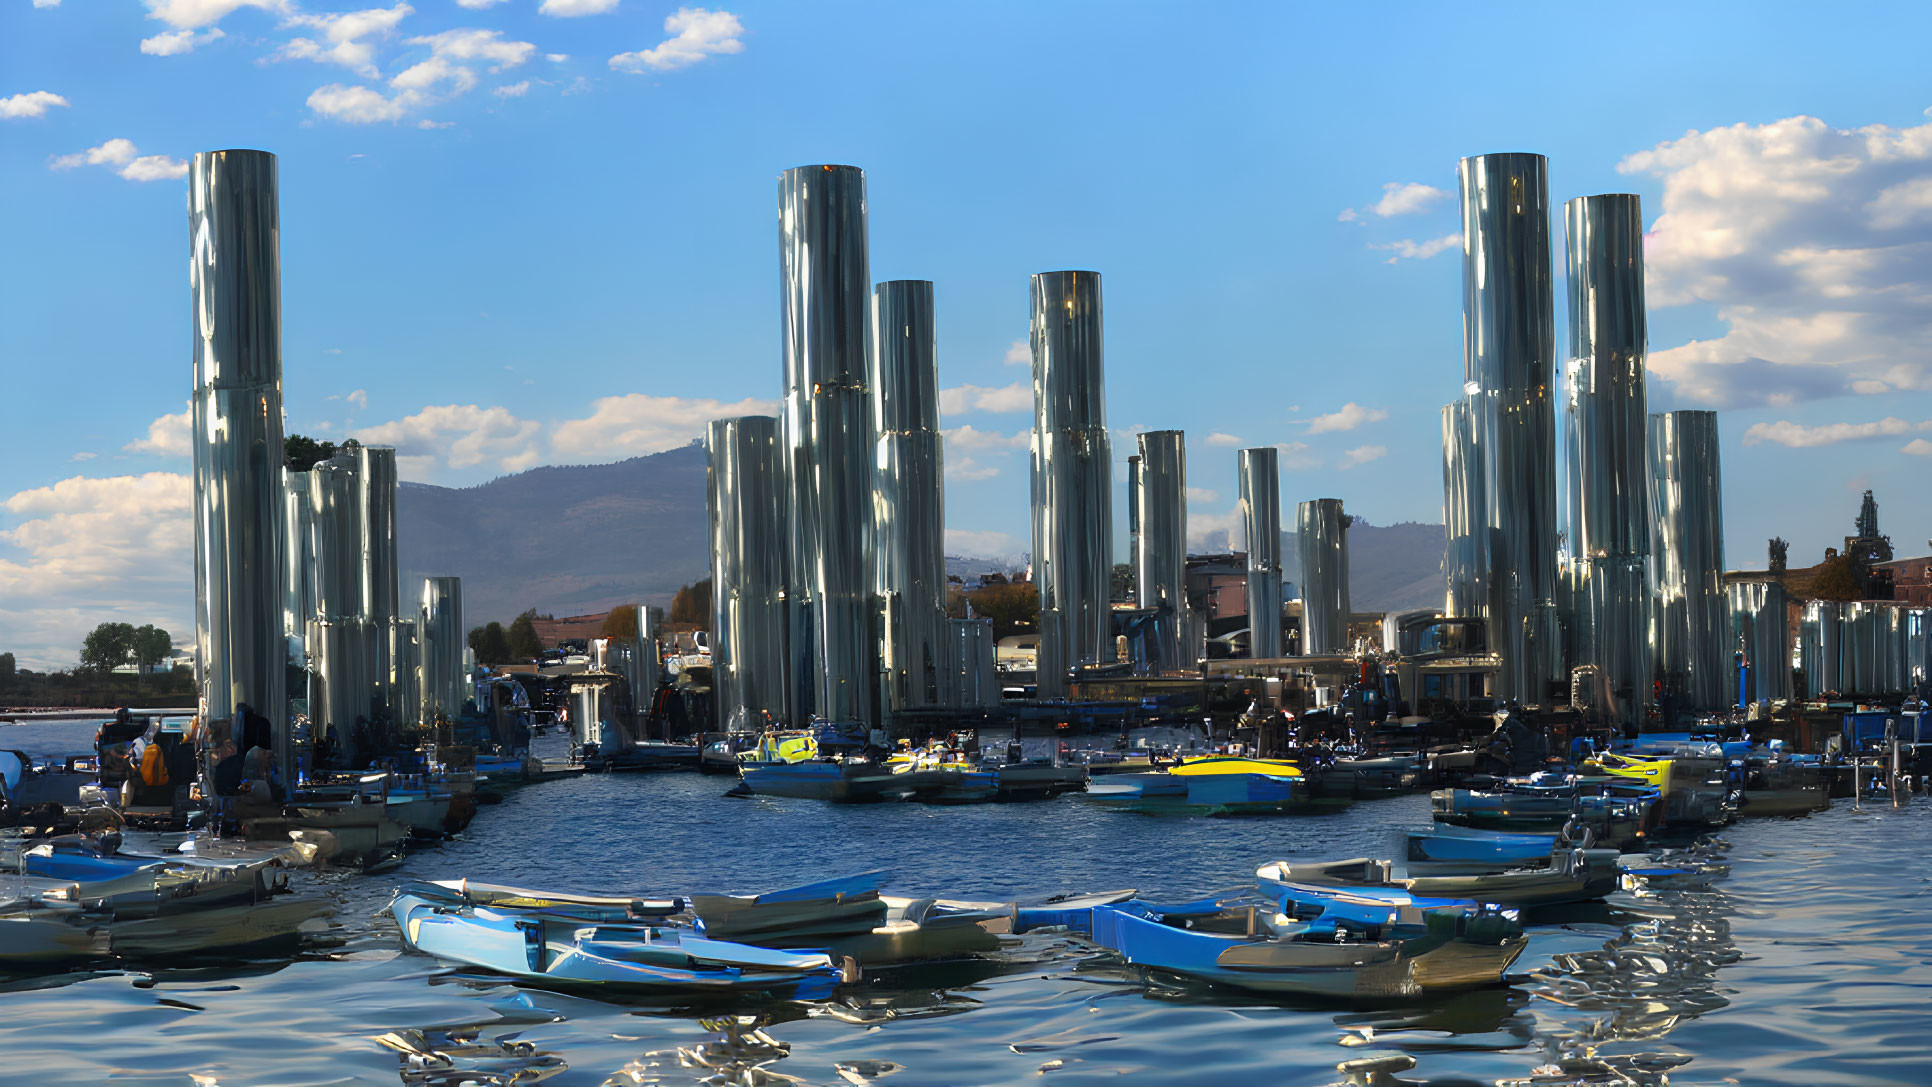 Tall Reflective Cylindrical Sculptures in Marina Scene